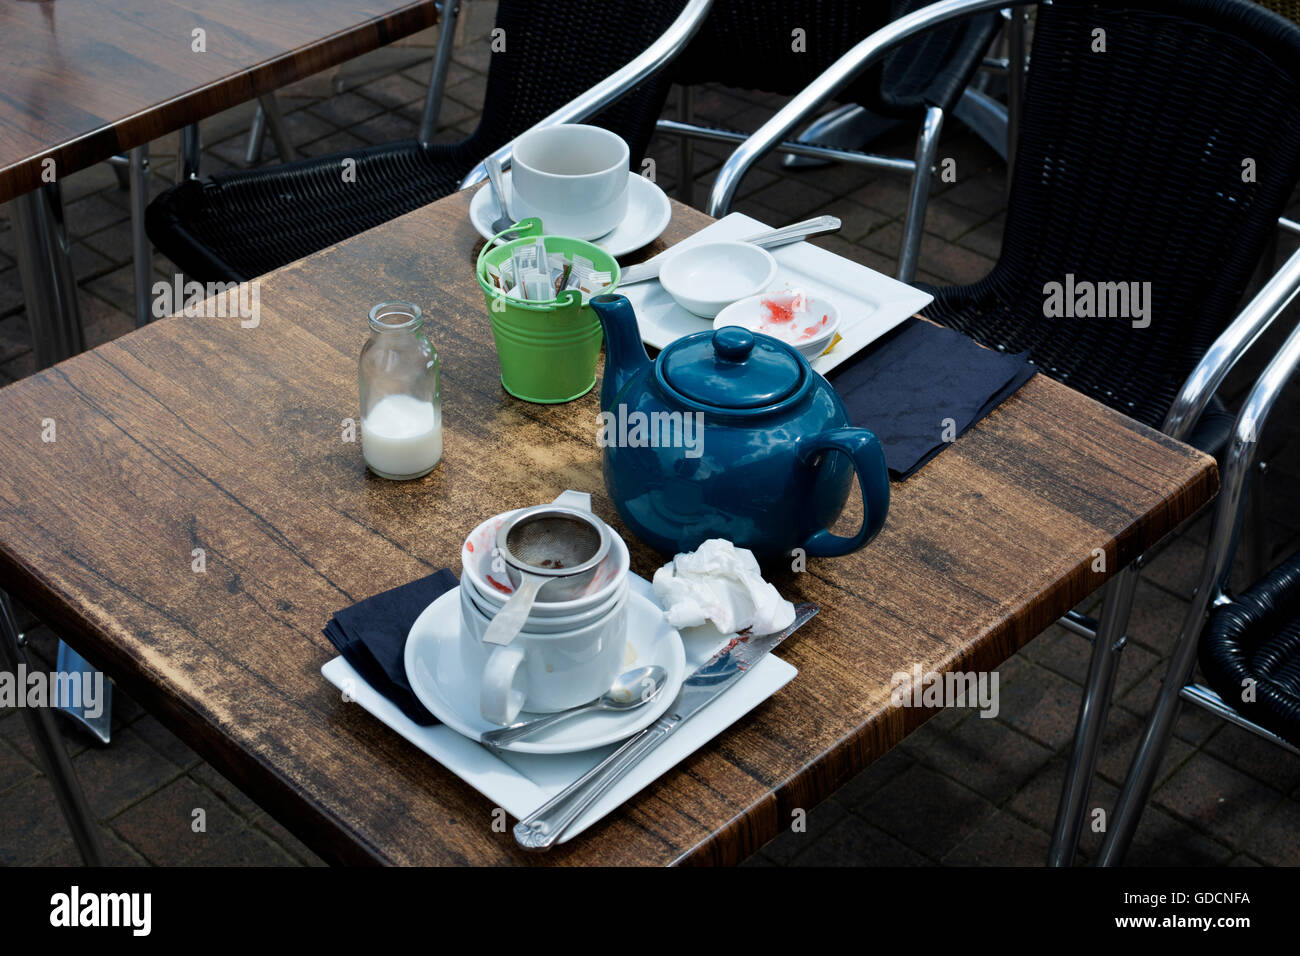 Cafe table with finished tea, Stratford-upon-Avon, UK Stock Photo